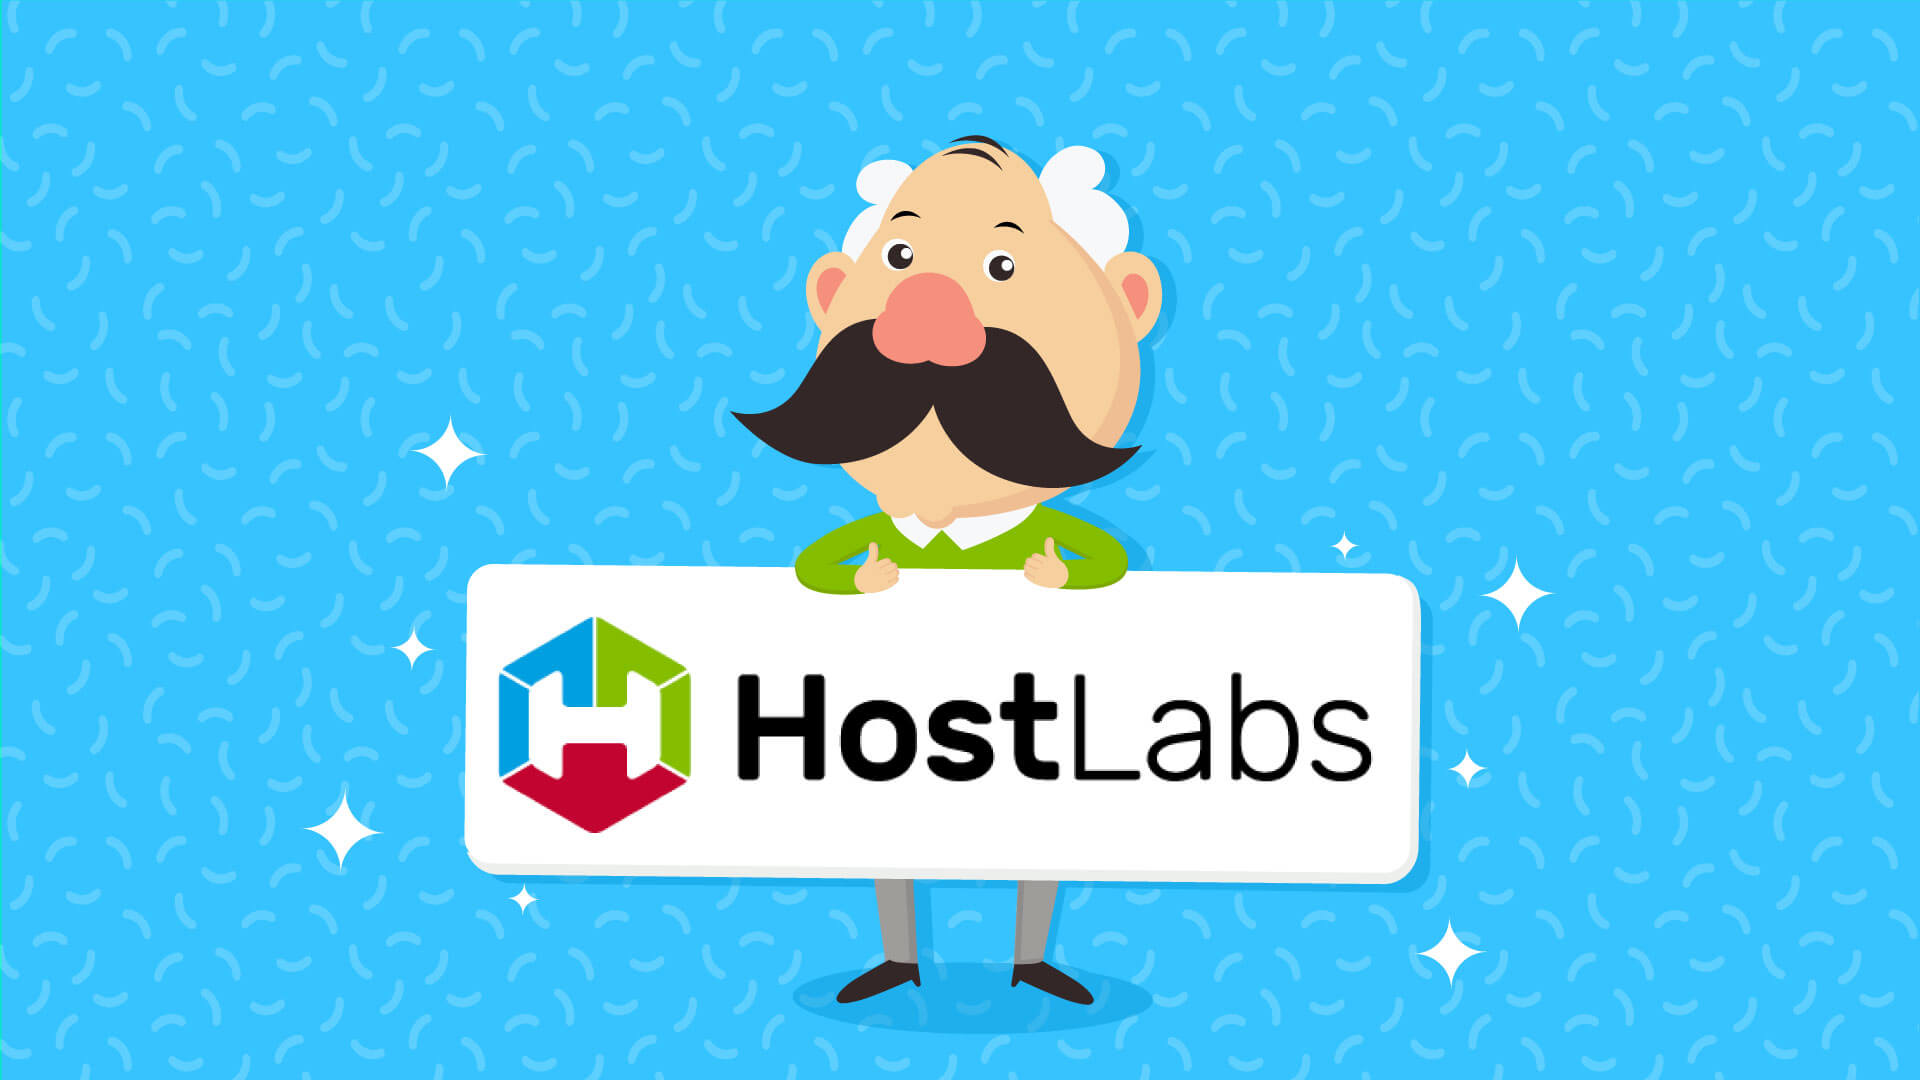 HostLabs is now a part of HostPapa's family